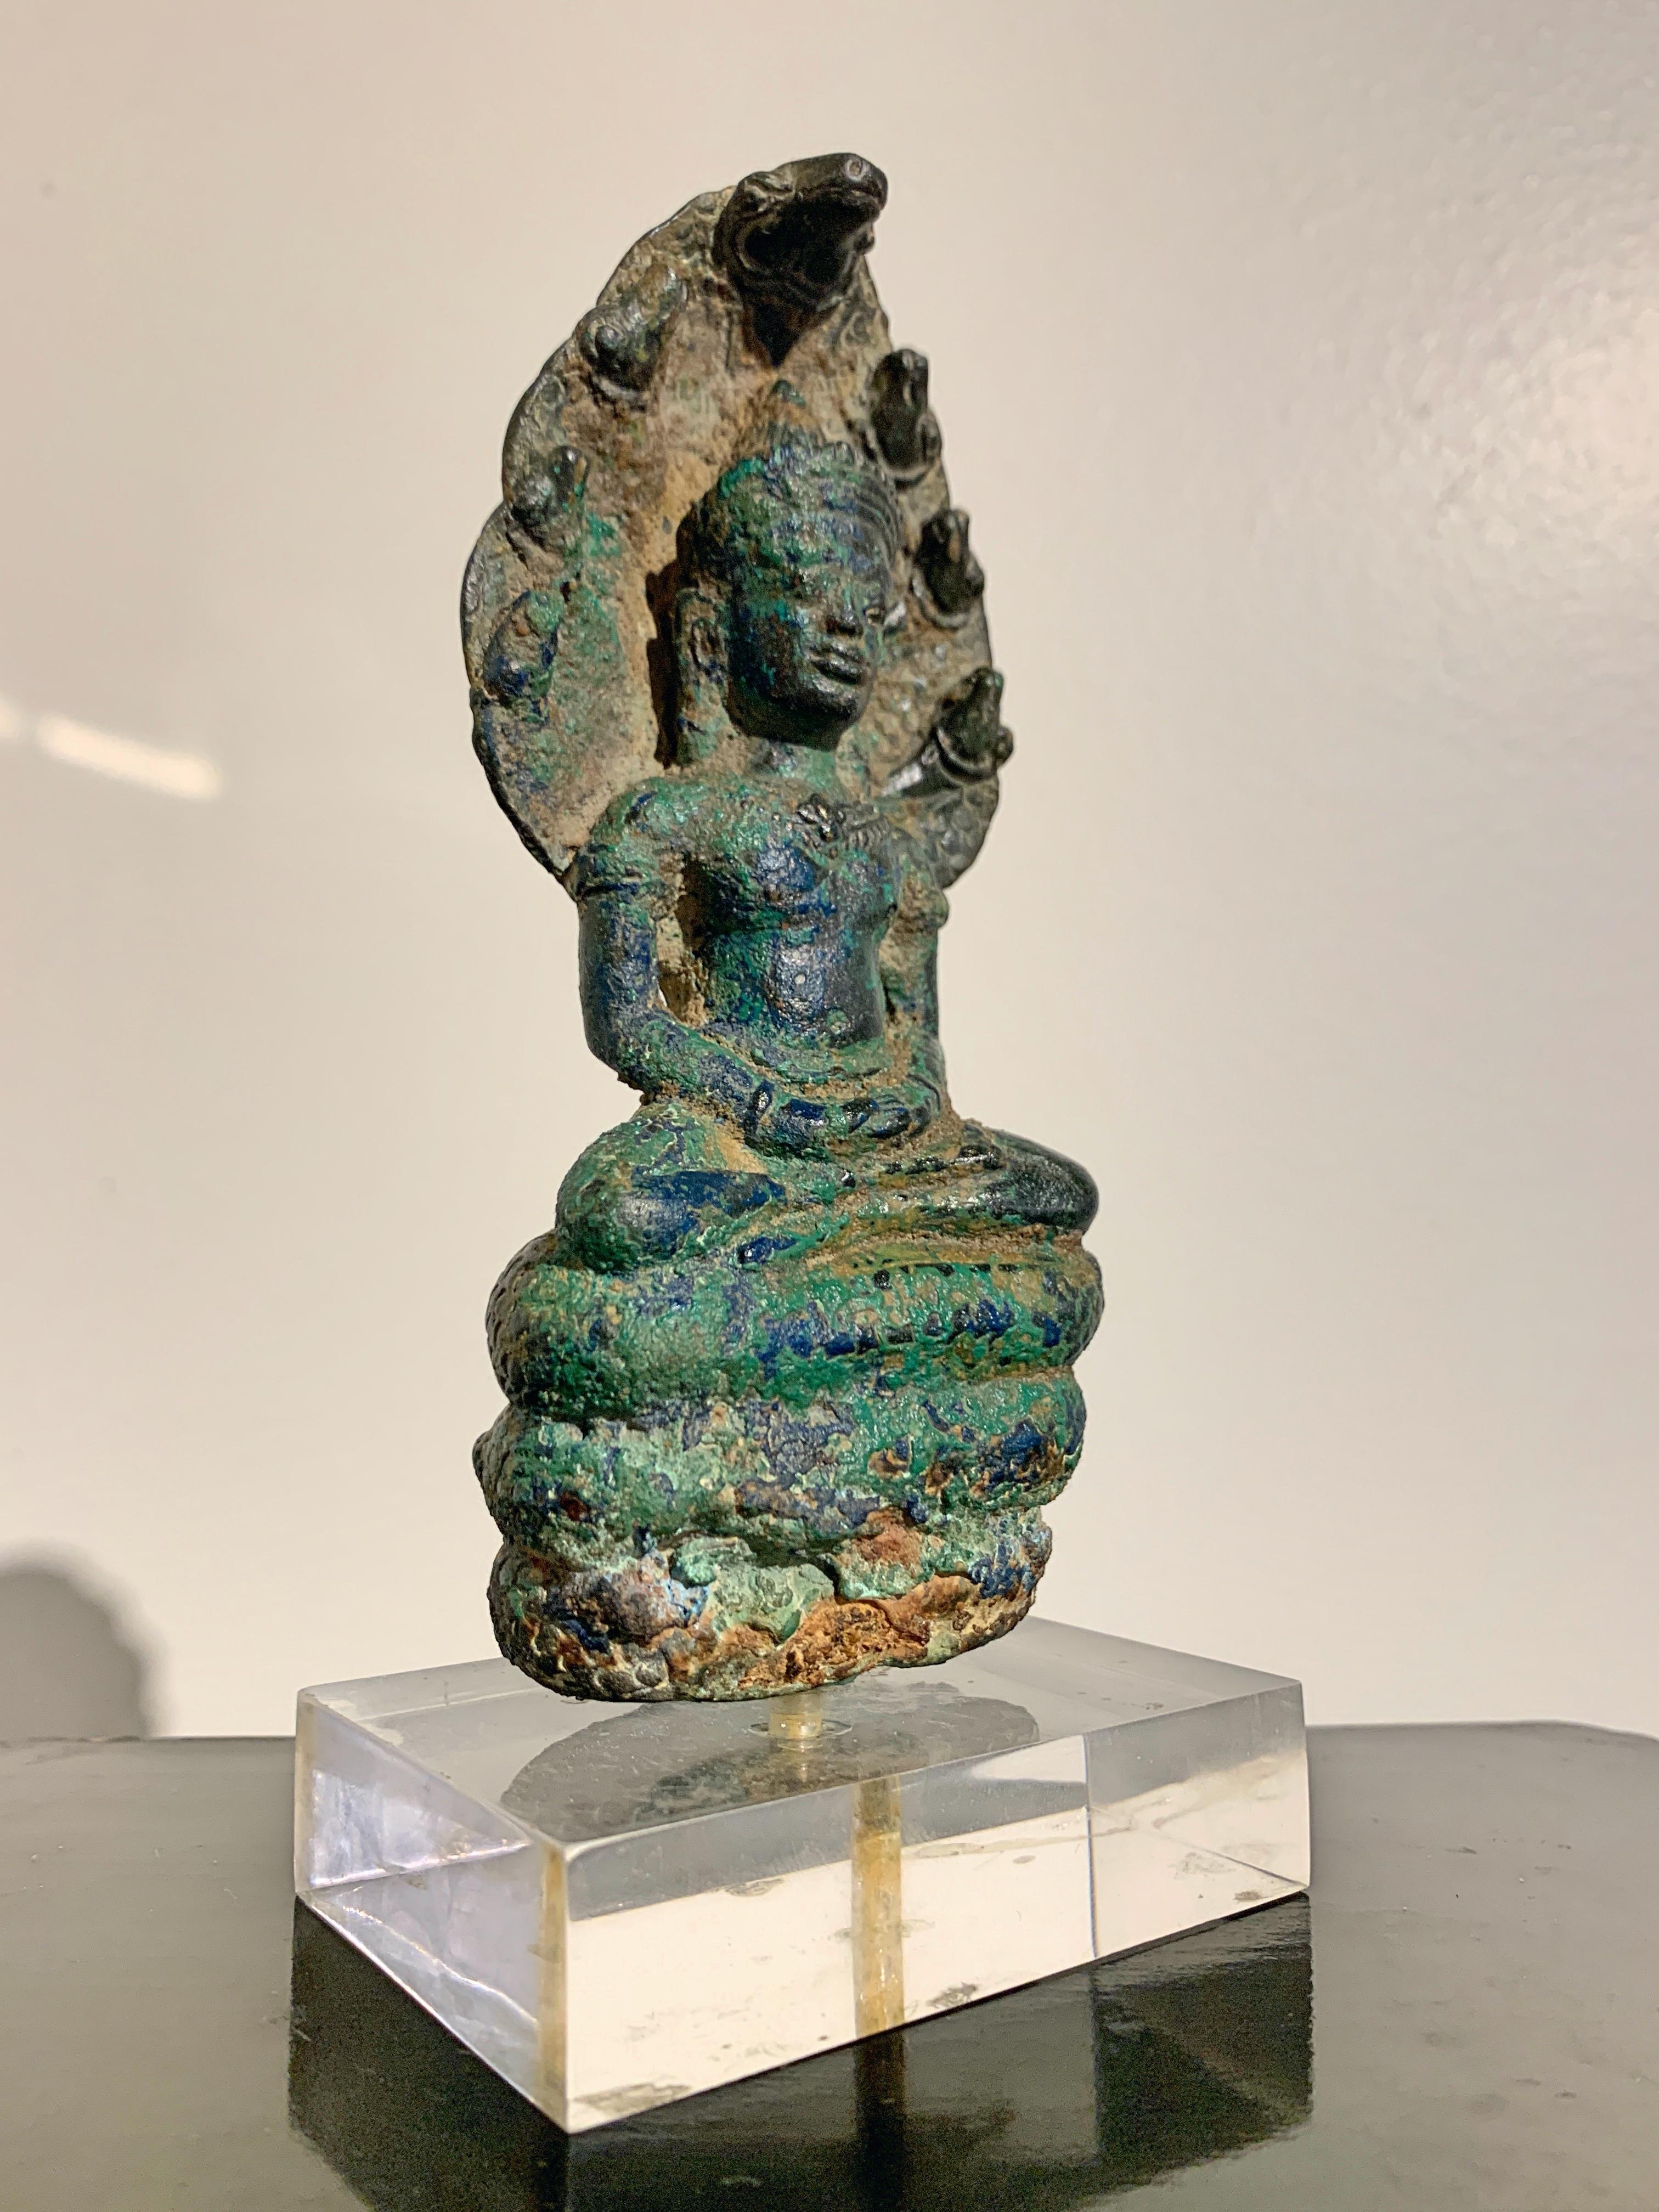 A wonderful small Khmer cast bronze figure of the Buddha sheltered by a Naga (Buddha Muchalinda), Angkor Period, style of the Bayon, late in the period, 14th century, Cambodia.

This small Khmer cast bronze sculpture is known as Buddha Muchalinda,